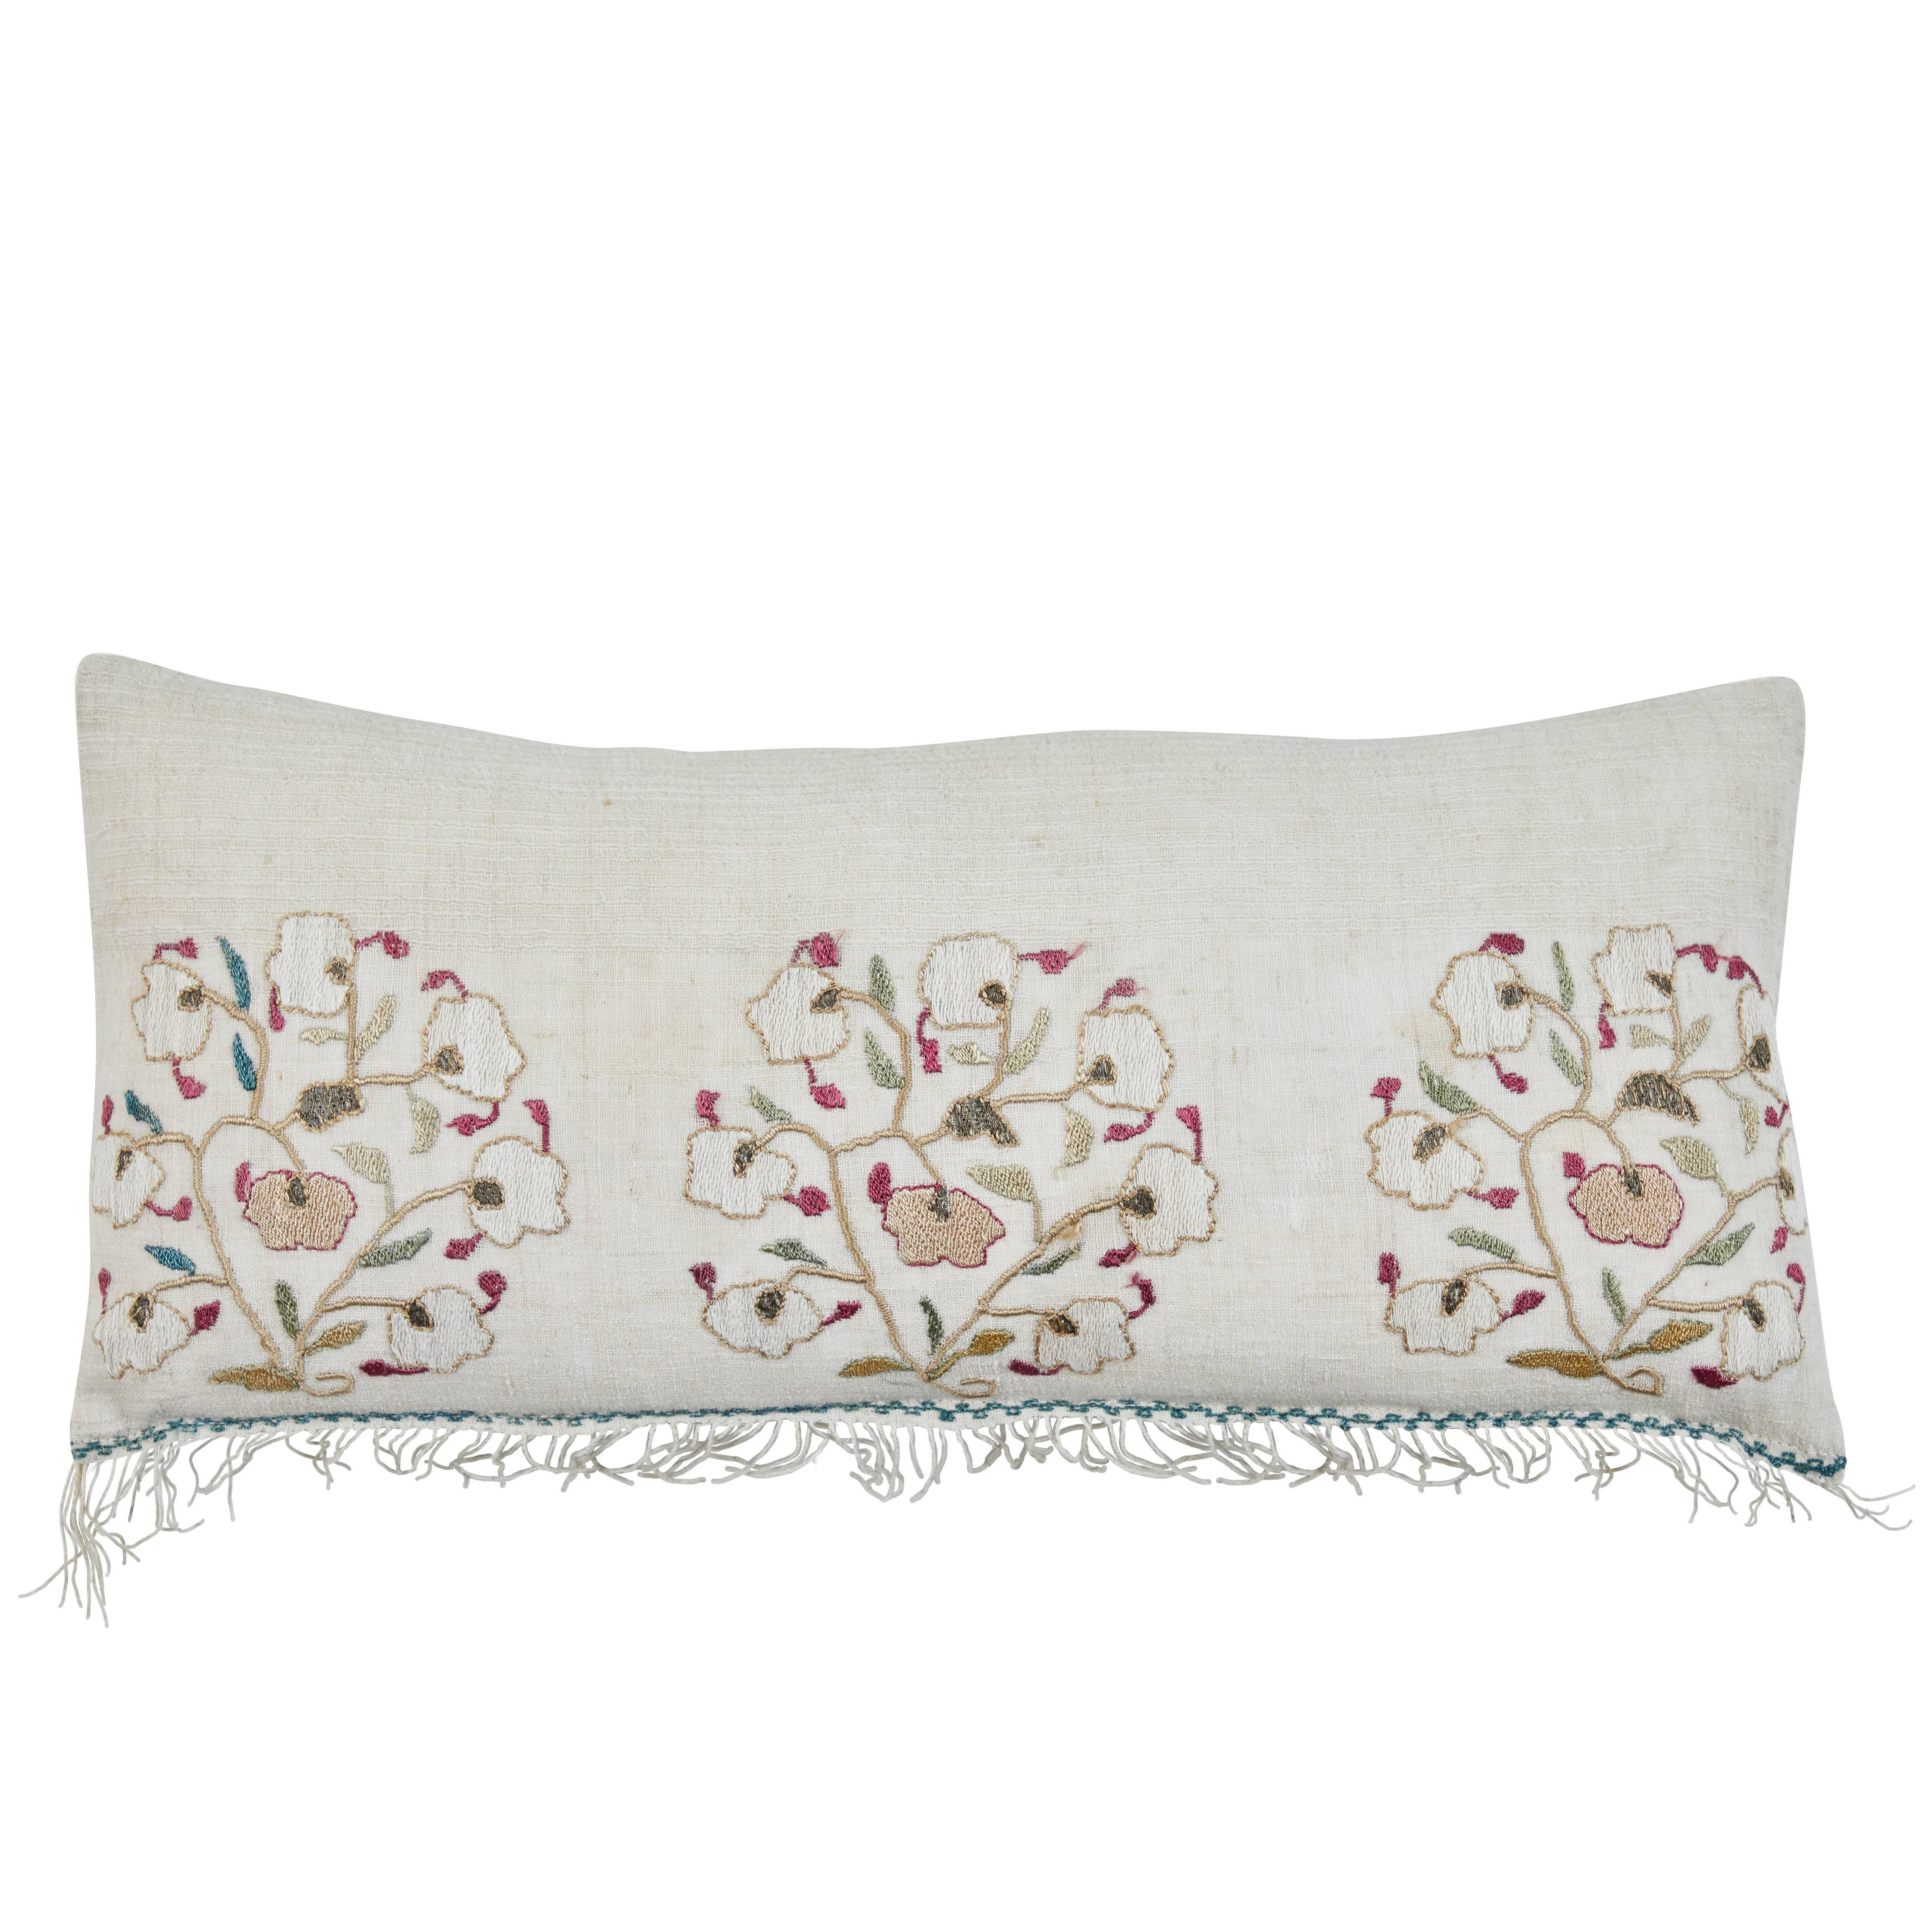 Antique Turkish Ottoman Embroidery Pillow For Sale